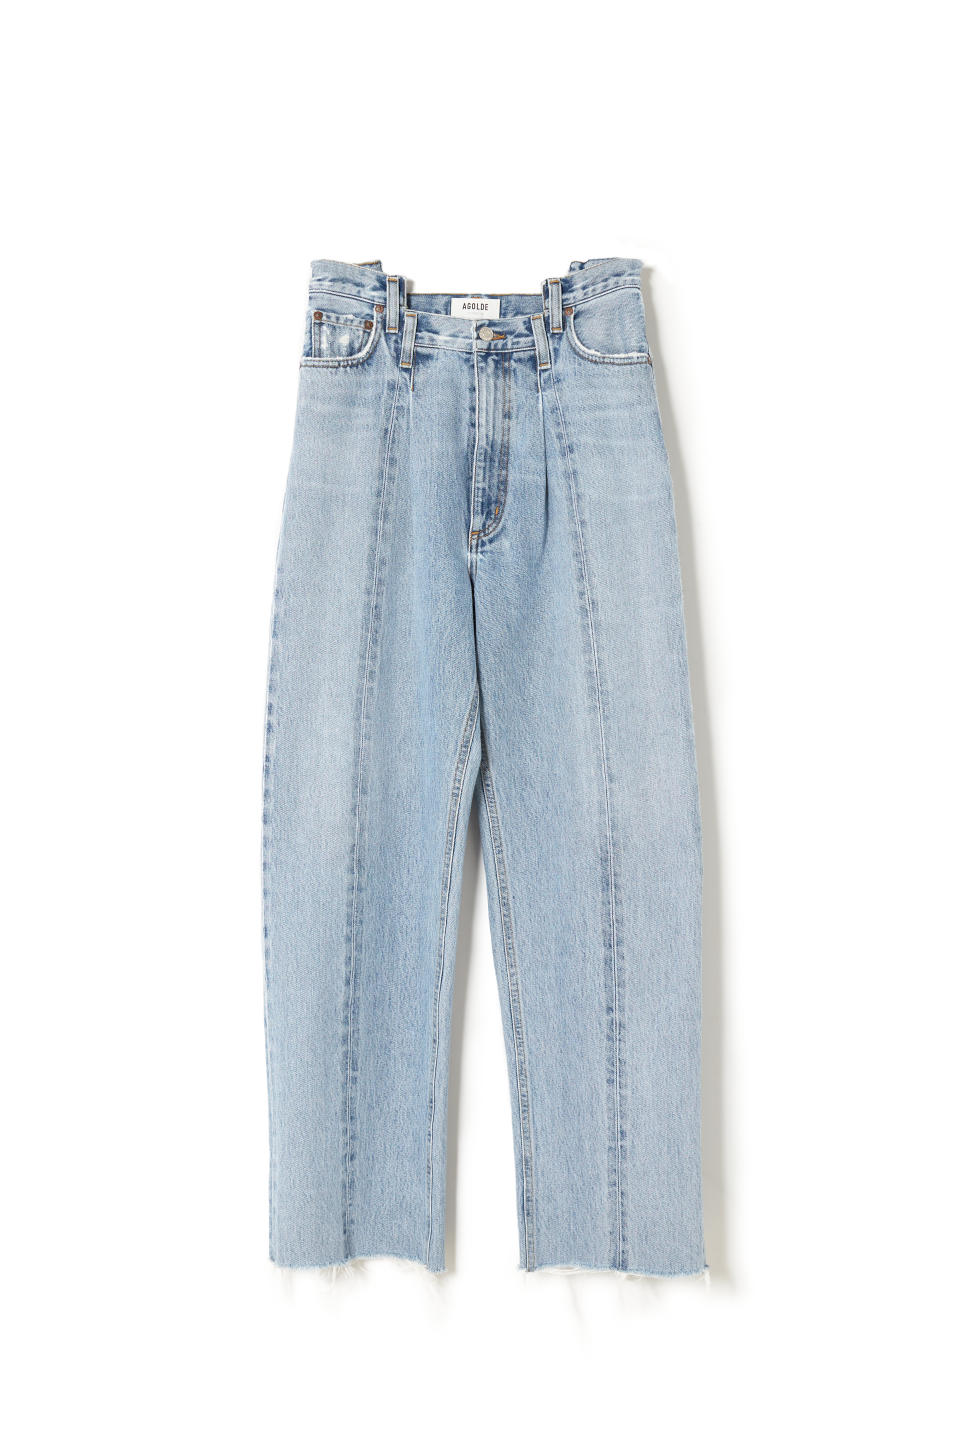 Agolde’s Pieced Angled Jean, made with 100 percent organic cotton.